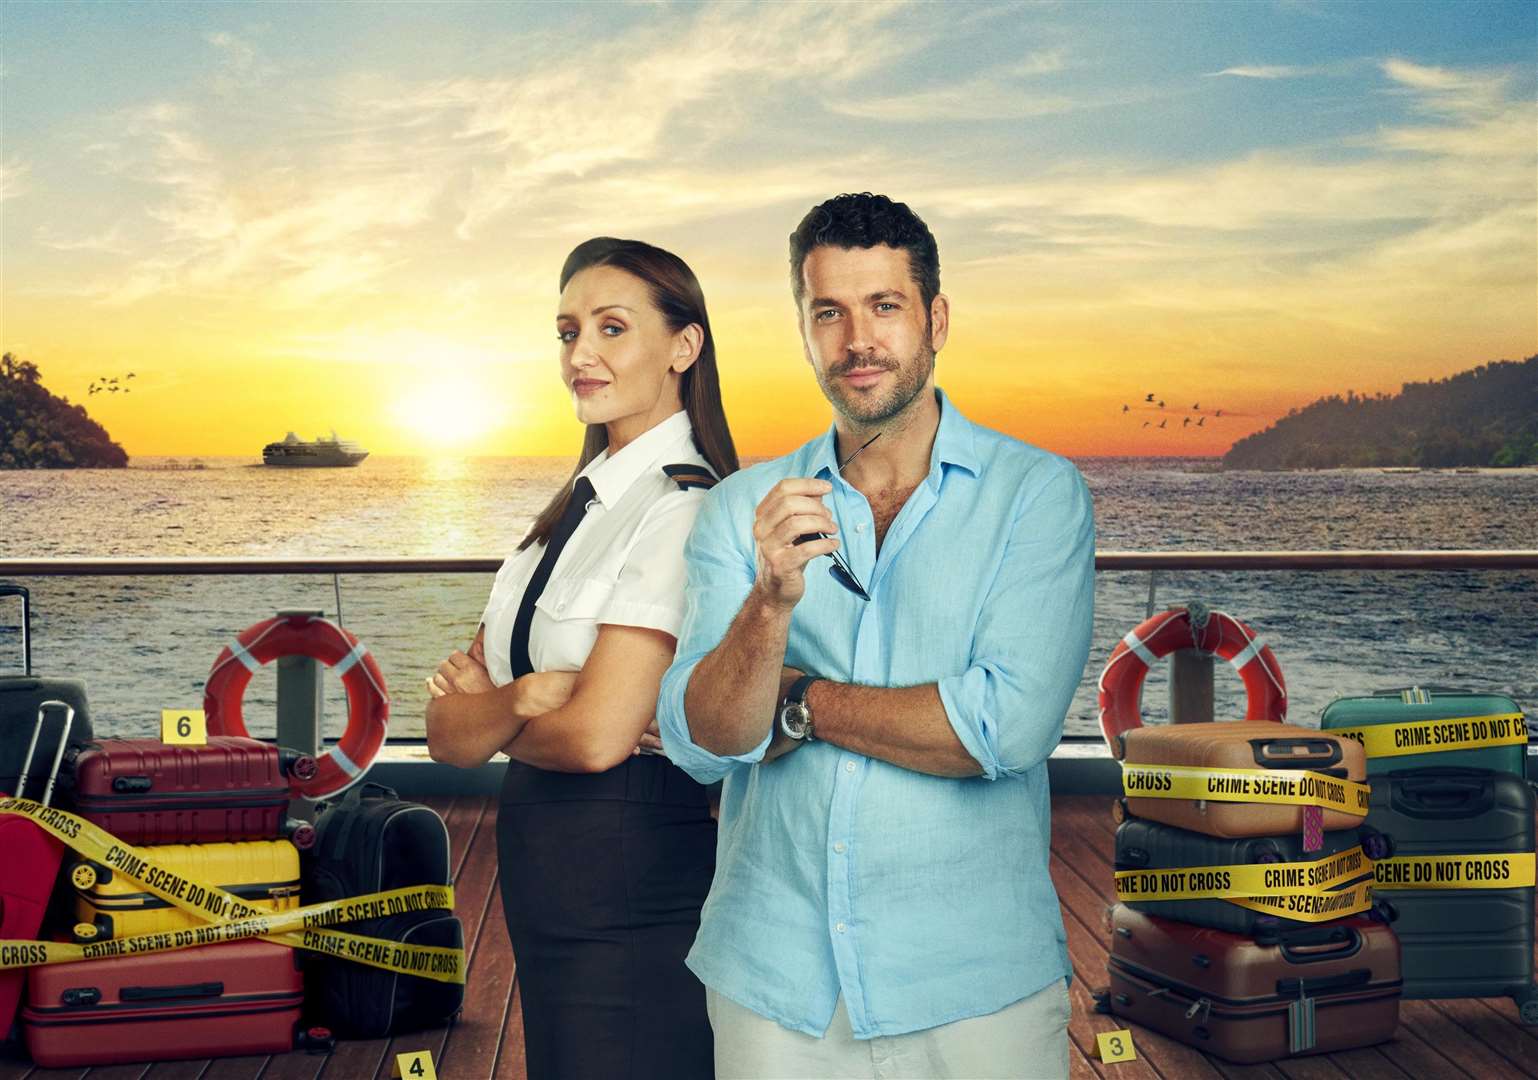 The Good Ship Murder with Catherine Tyldesley playing Kate, Shayne Ward playing Jack.